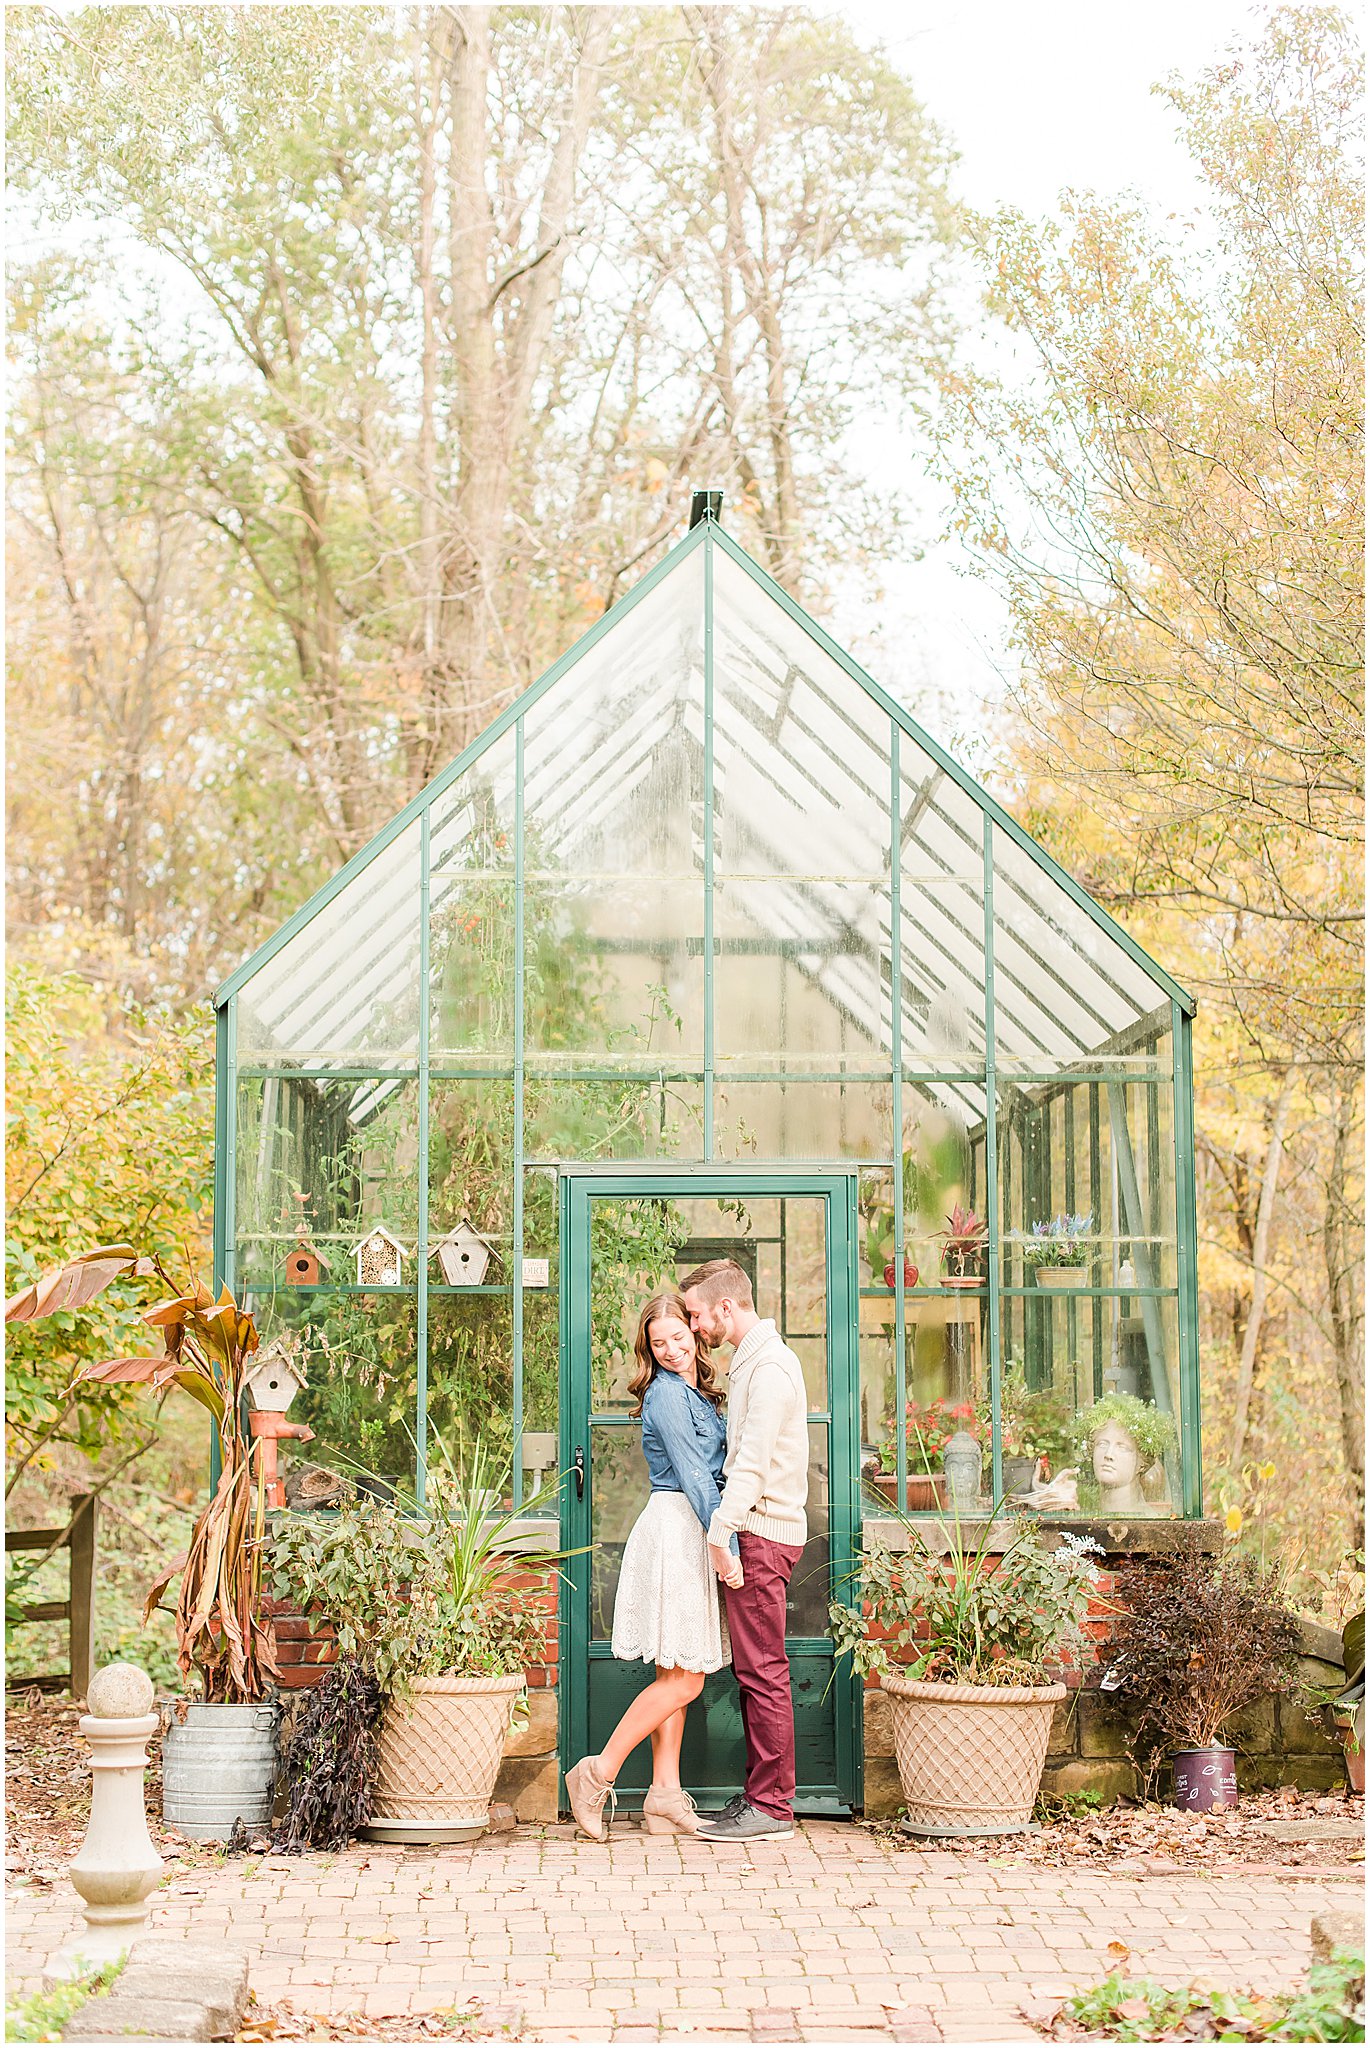 Couple nuzzling in front of green greenhouse at Defries Gardens